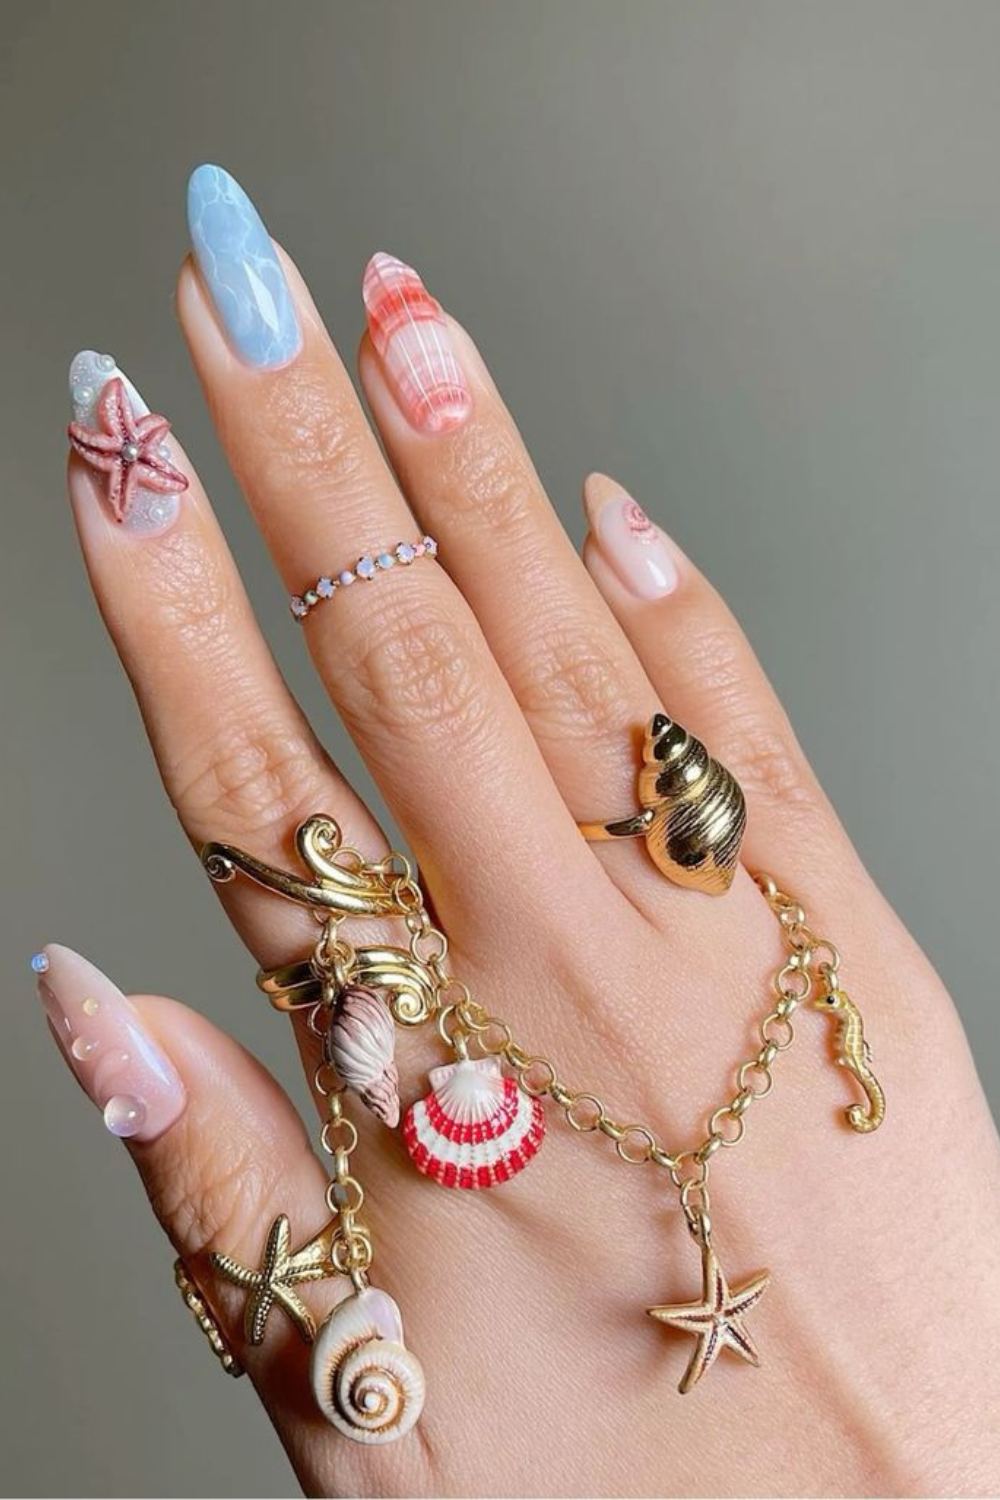 The Ultimate Selection of 3D Nails That Are Oh-So-Beautiful!